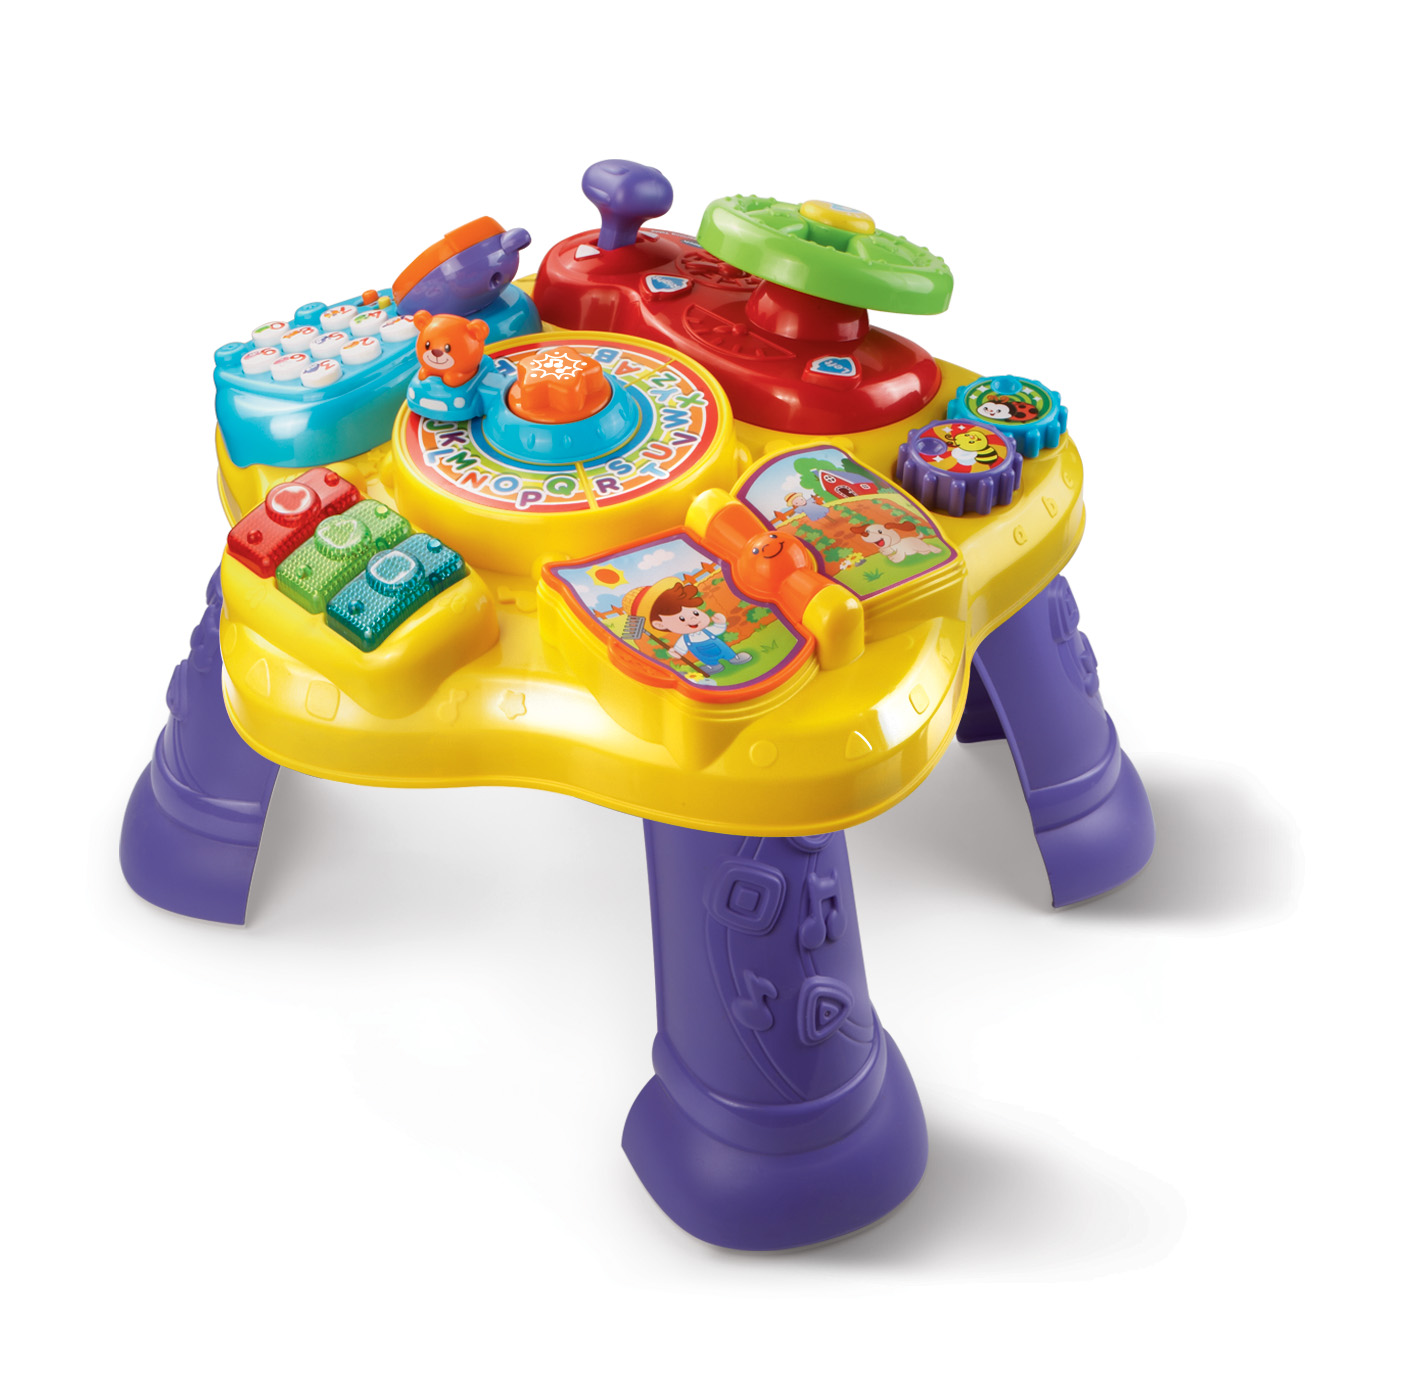 VTech Magic Star Learning Table (Yellow) $20 + Free S&H w/ Walmart+, Prime or $25+